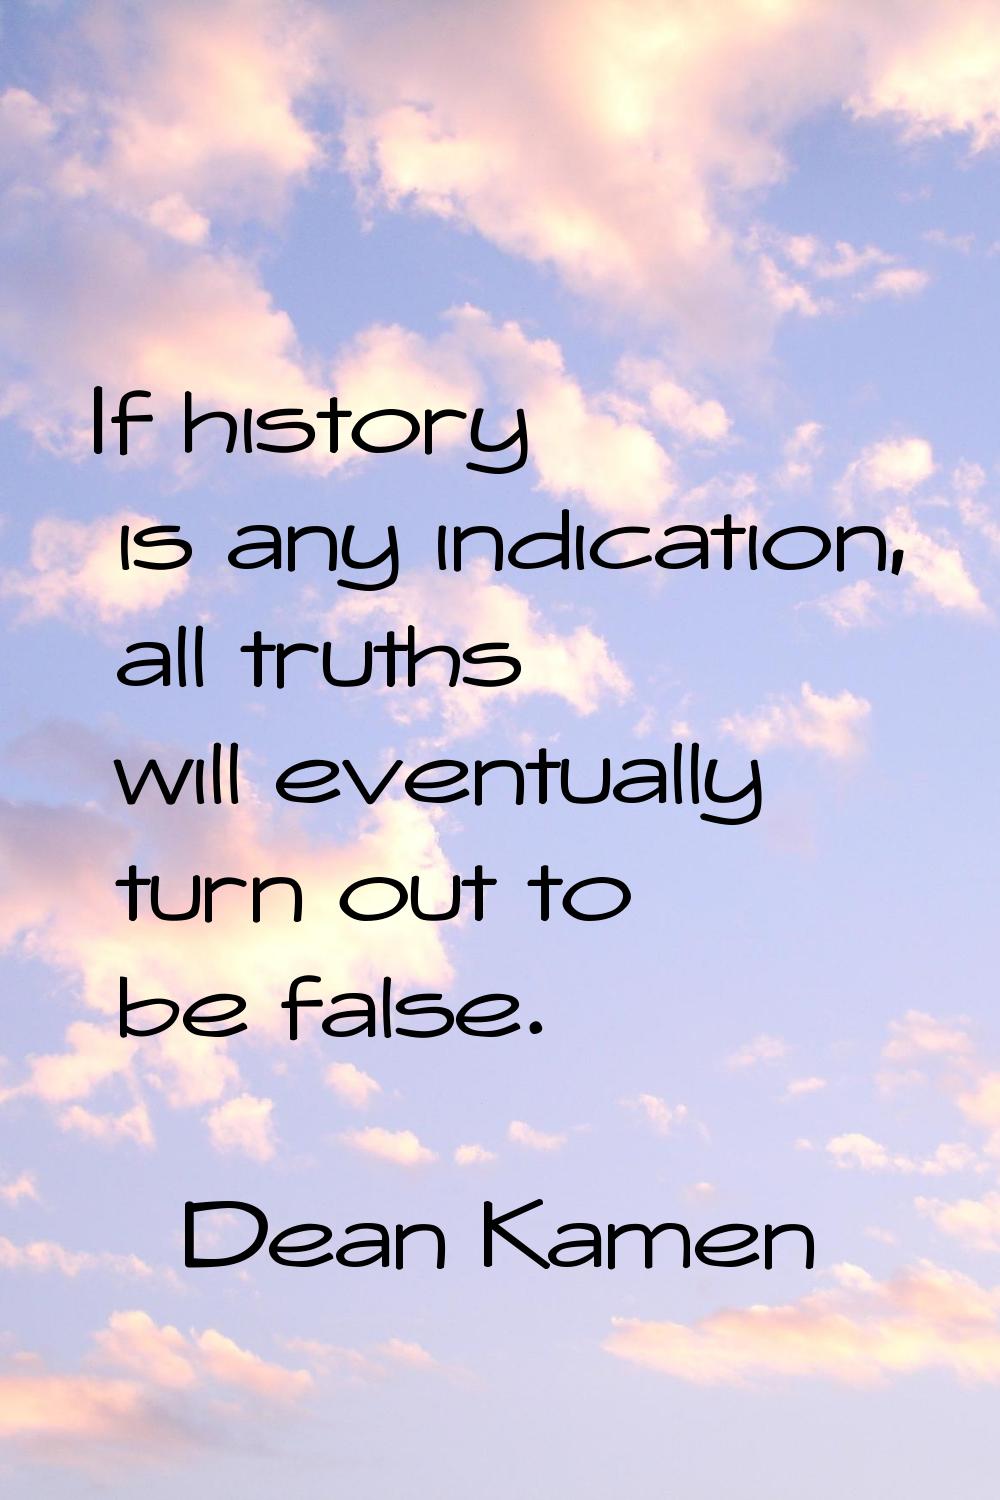 If history is any indication, all truths will eventually turn out to be false.